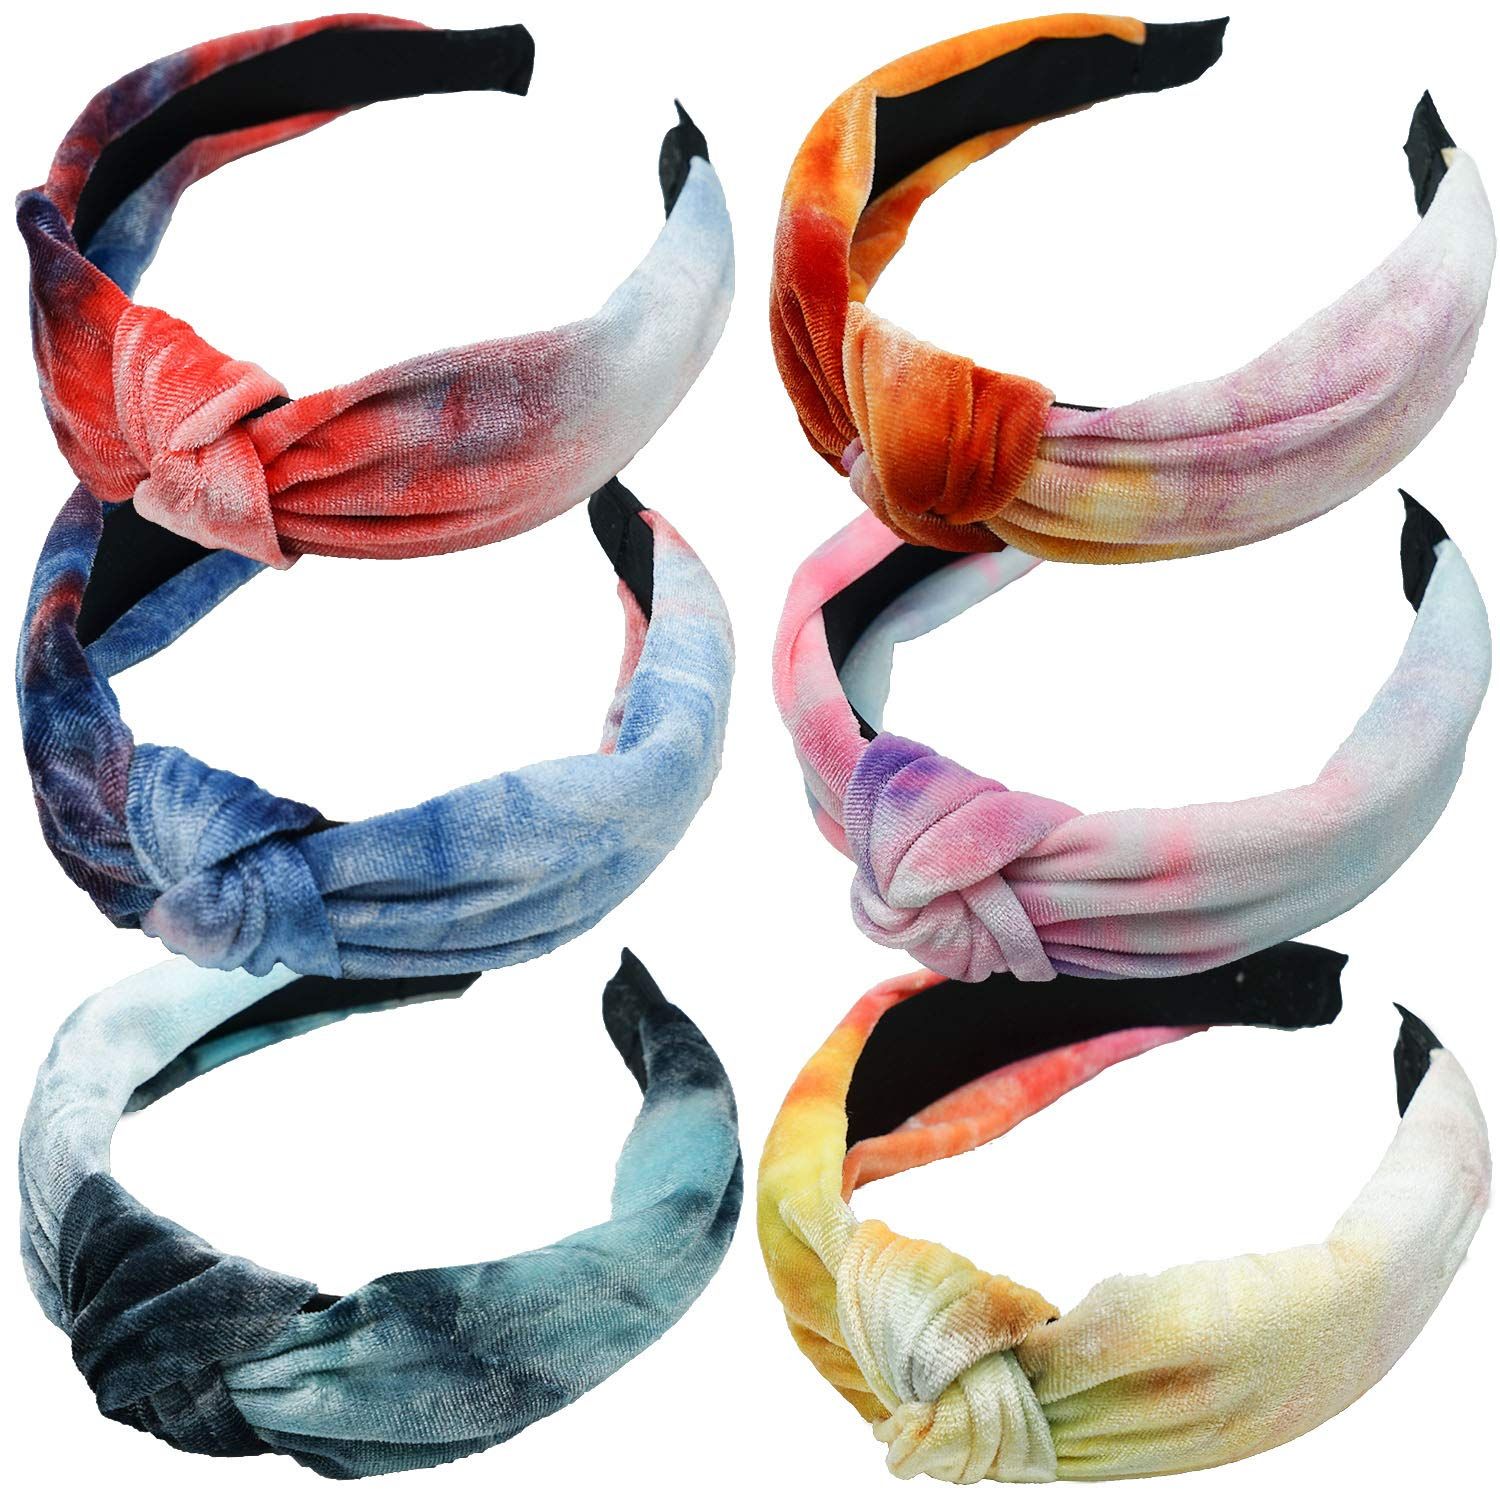 DeD 6 Pieces Velvet Knotted Headbands for Women Girls, Vintage Head Wrap Tie Dye Twisted Hair Hoop H | Amazon (US)